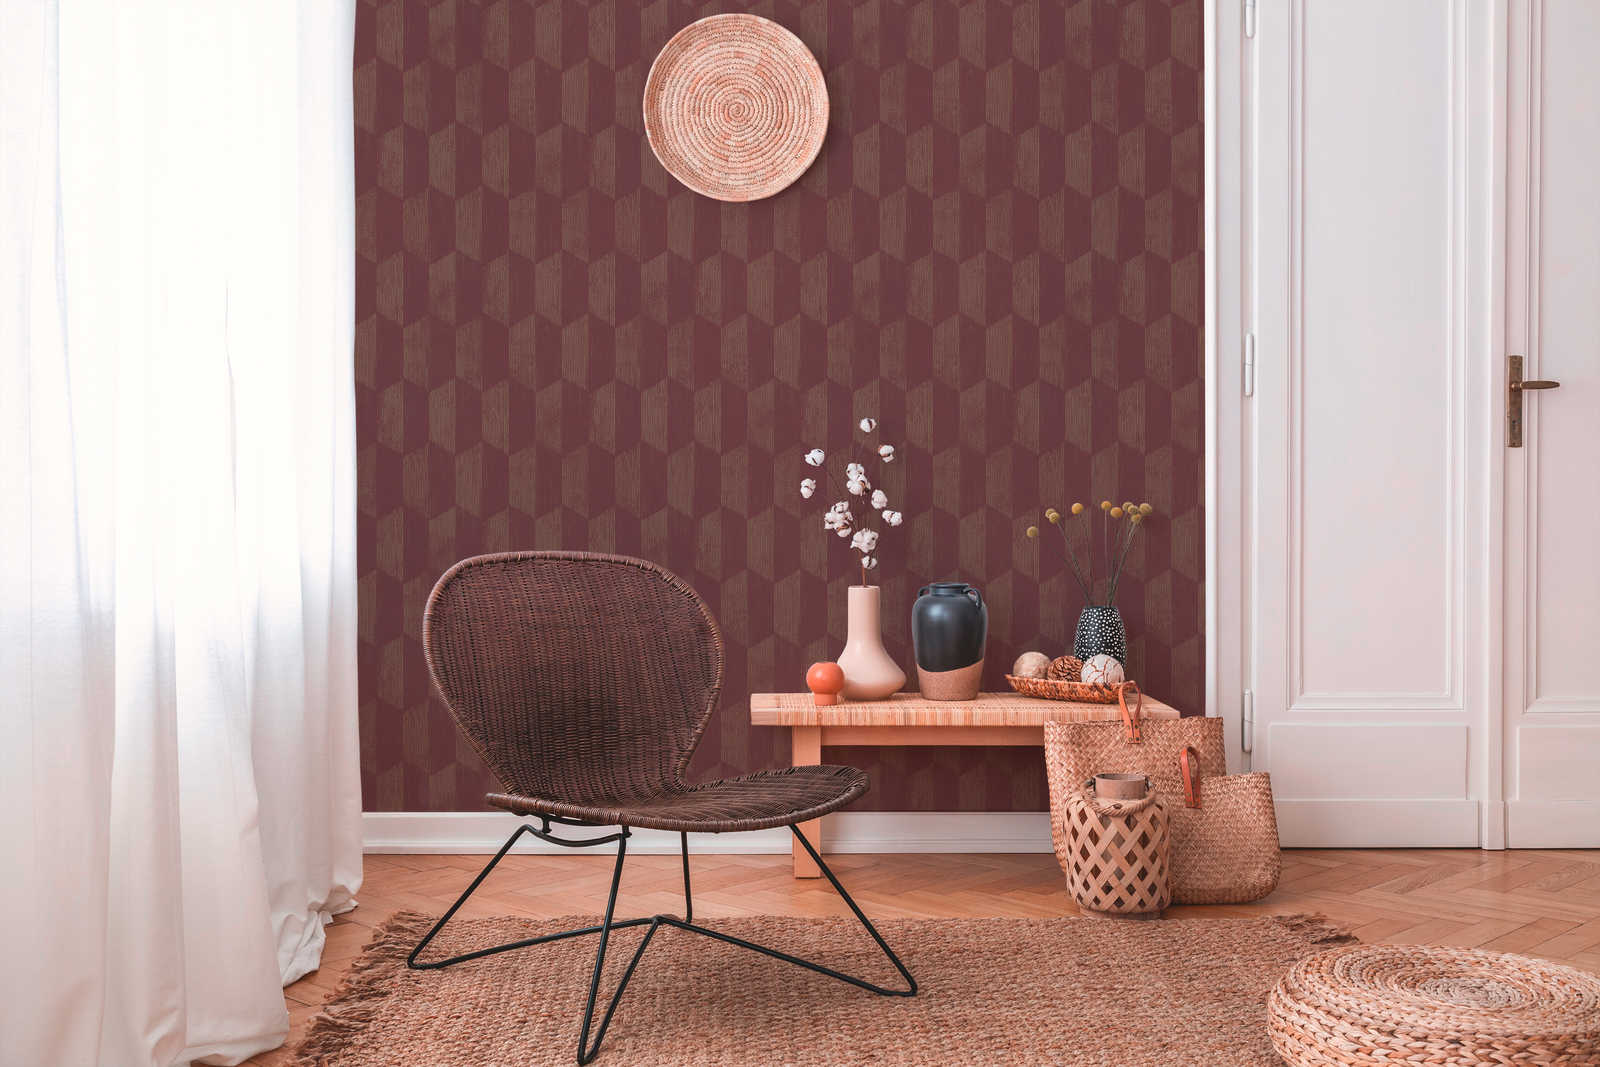             Textured wallpaper with 3D graphic pattern - metallic, red
        